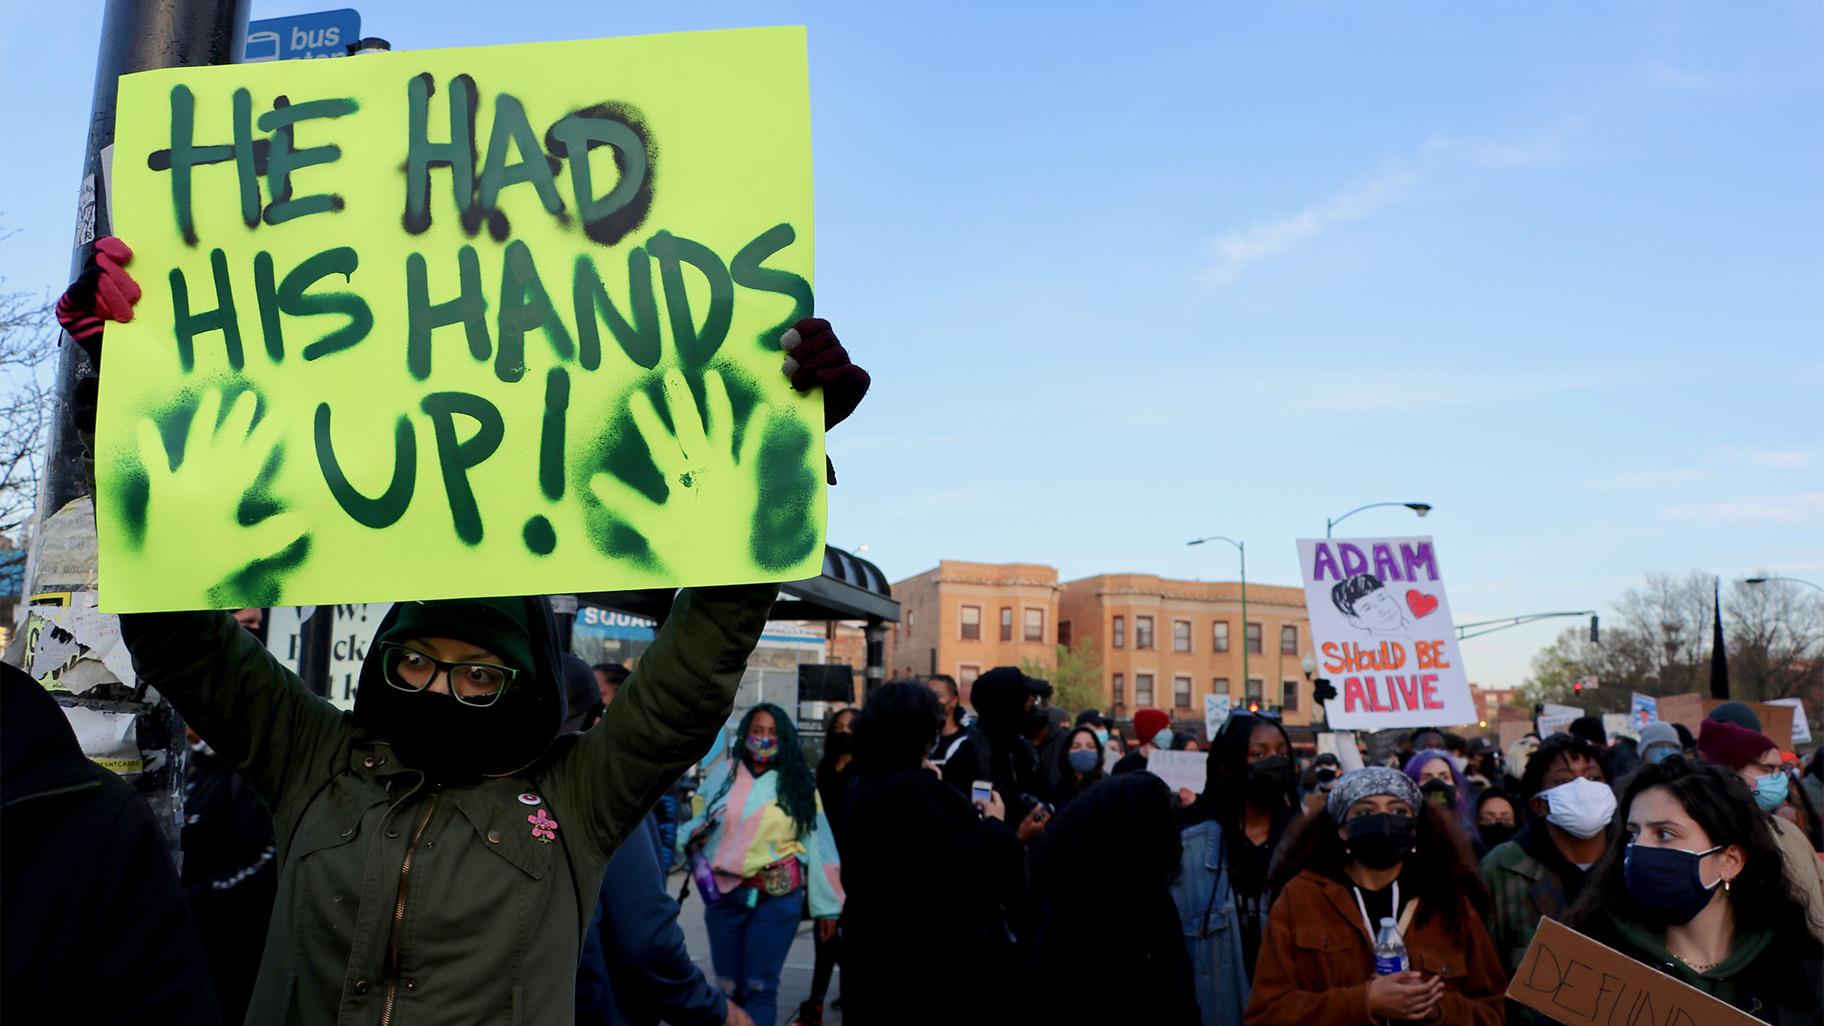 Protester Natalia Sustaita holds a sign reading “He Had His Hands Up!” at a Logan Square protest April 16, 2021, over the fatal police shooting of 13-year-old Adam Toledo. (Evan Garcia / WTTW News)